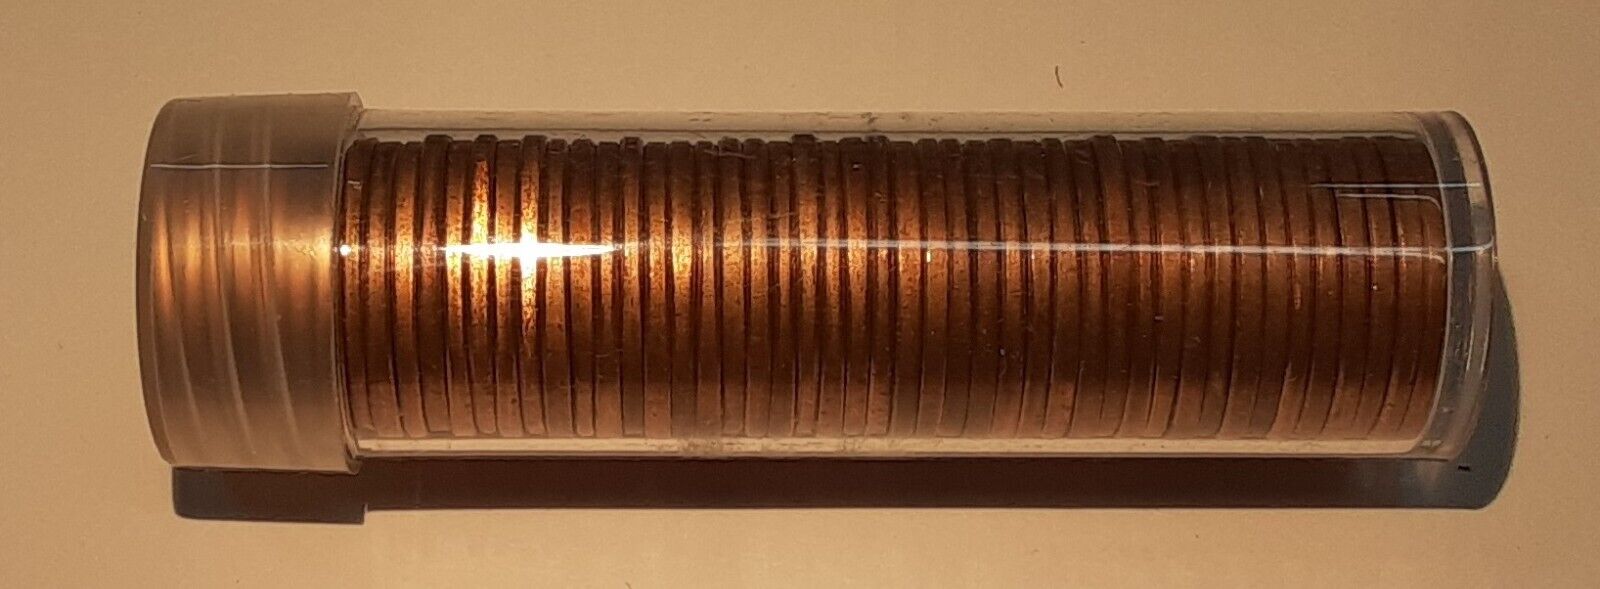 1965 United States Roll Of BU Lincoln Cents - 50 Coins Total in Tubes